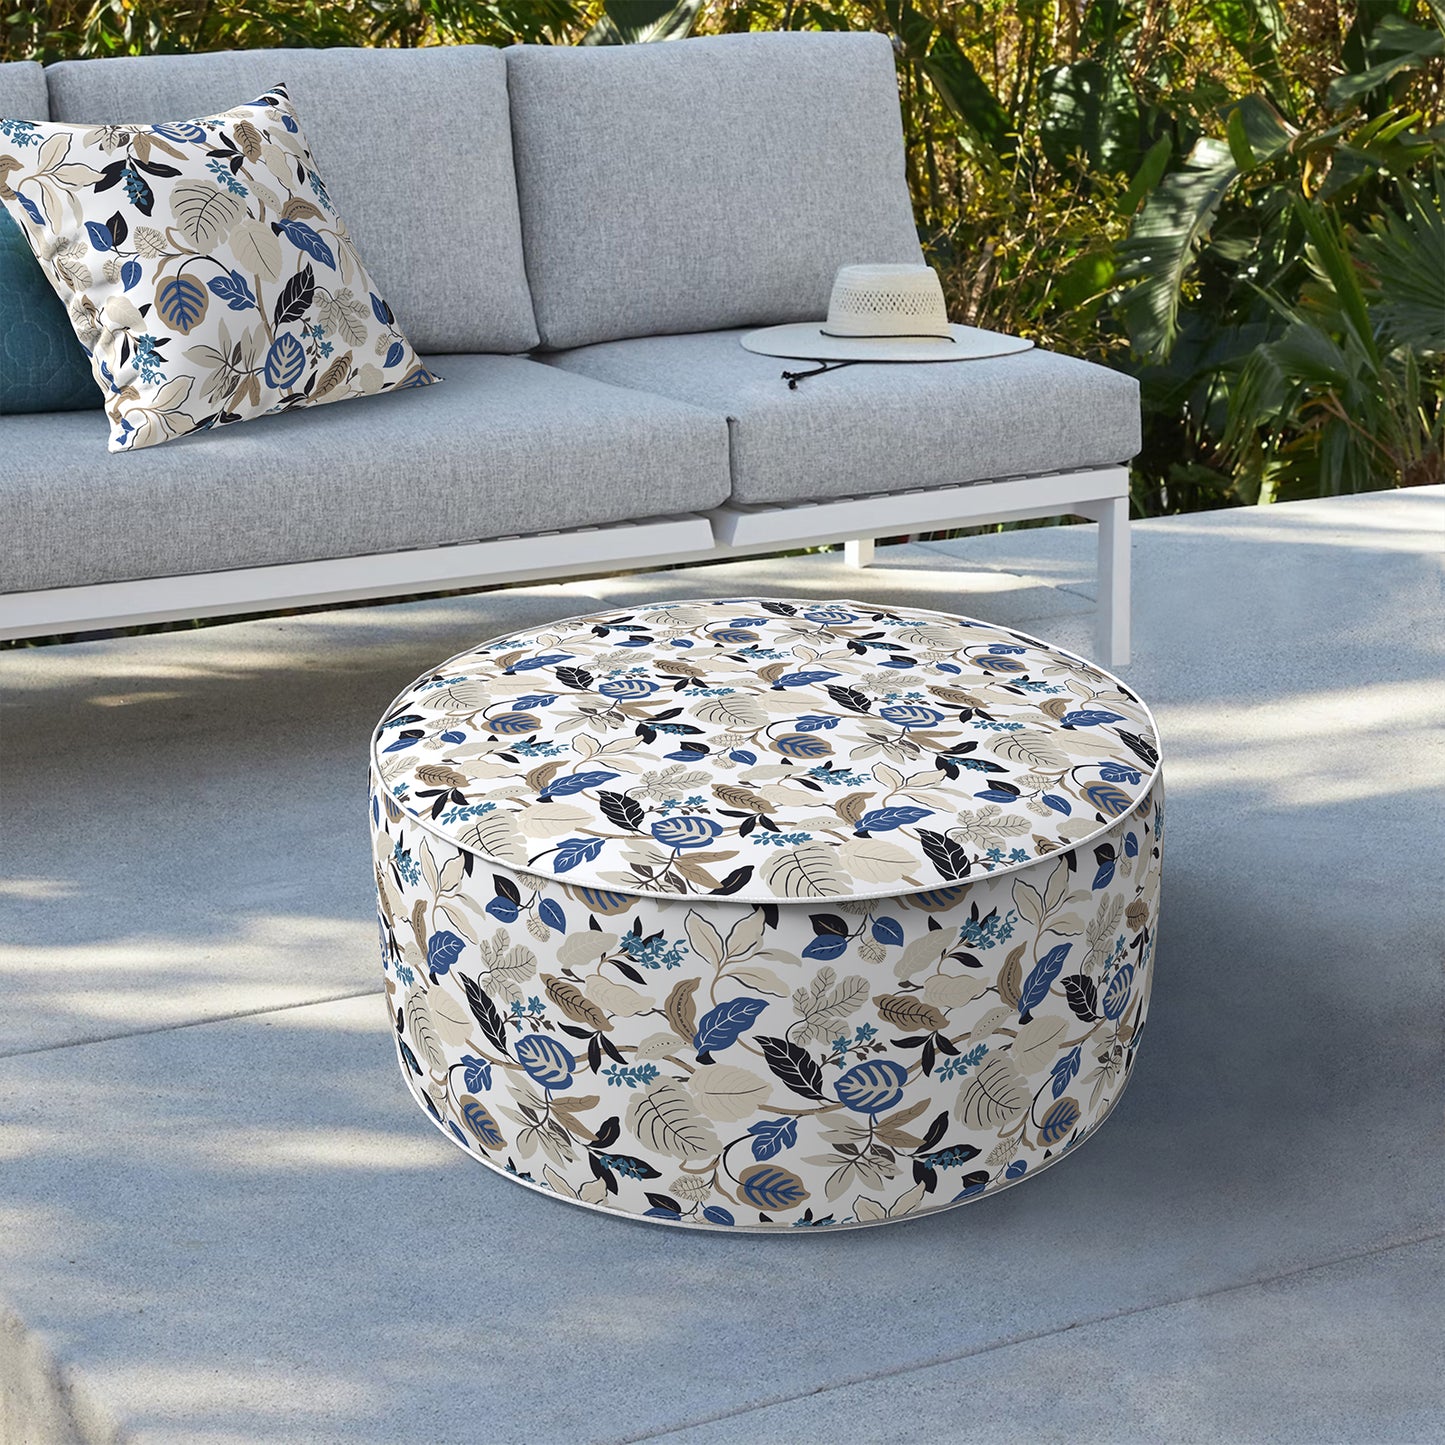 Outdoor Inflatable Stool Ottoman, All Weather Portable Footrest Stool, Furniture Stool Ottomans for Home Garden Beach, D31”xH14”, Breeze Leaves Beige